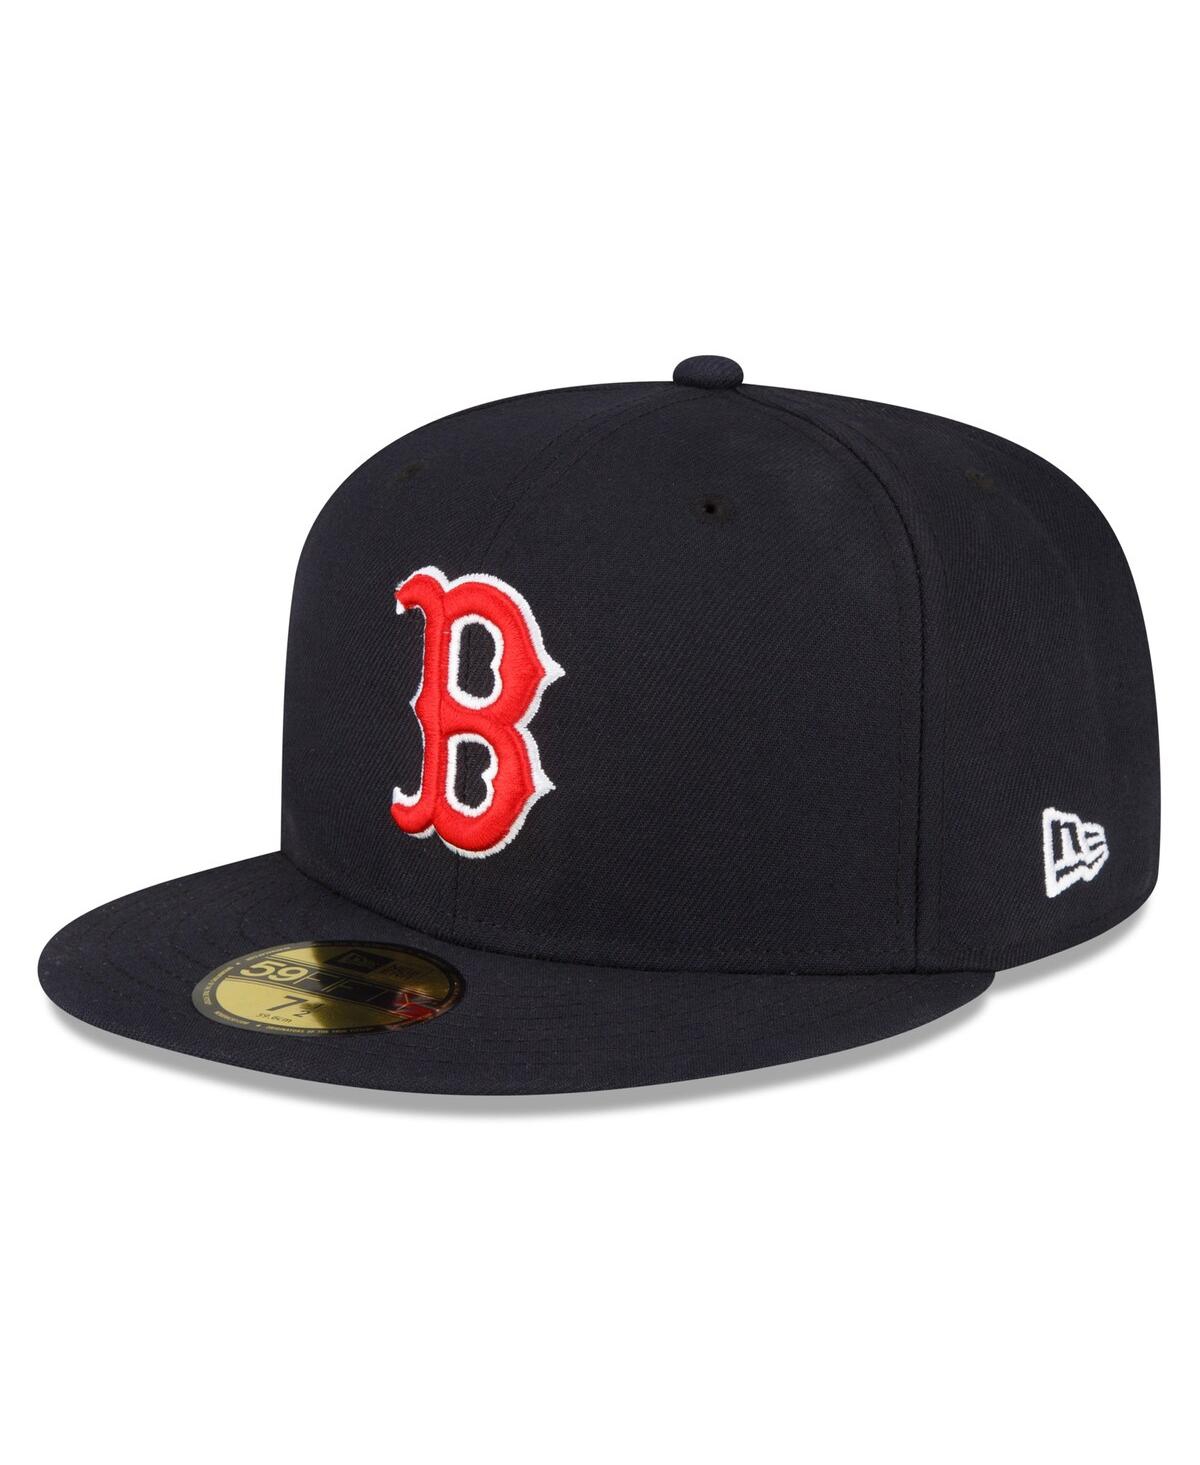 NEW ERA MEN'S NEW ERA NAVY BOSTON RED SOX AUTHENTIC COLLECTION REPLICA 59FIFTY FITTED HAT